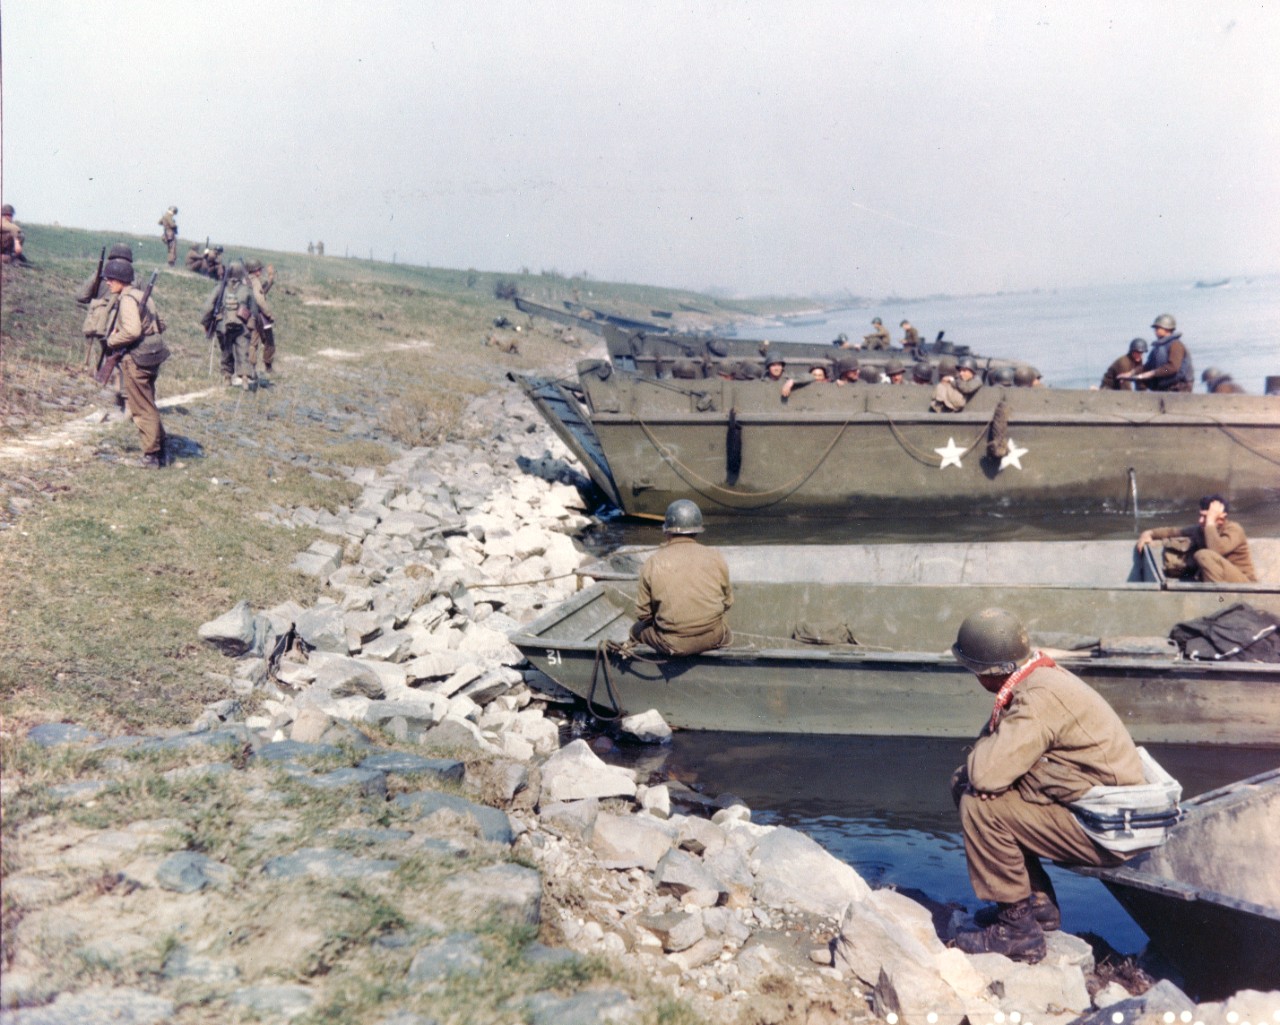 Men of the 1st Battalion, 314th Infantry Regiment, 79th Division, prepare to board LCVP landing craft, as the unit crossed the Rhine River at Orsoy, Germany, 10 March 1945. Boats in the foreground are Army bridge pontoons.